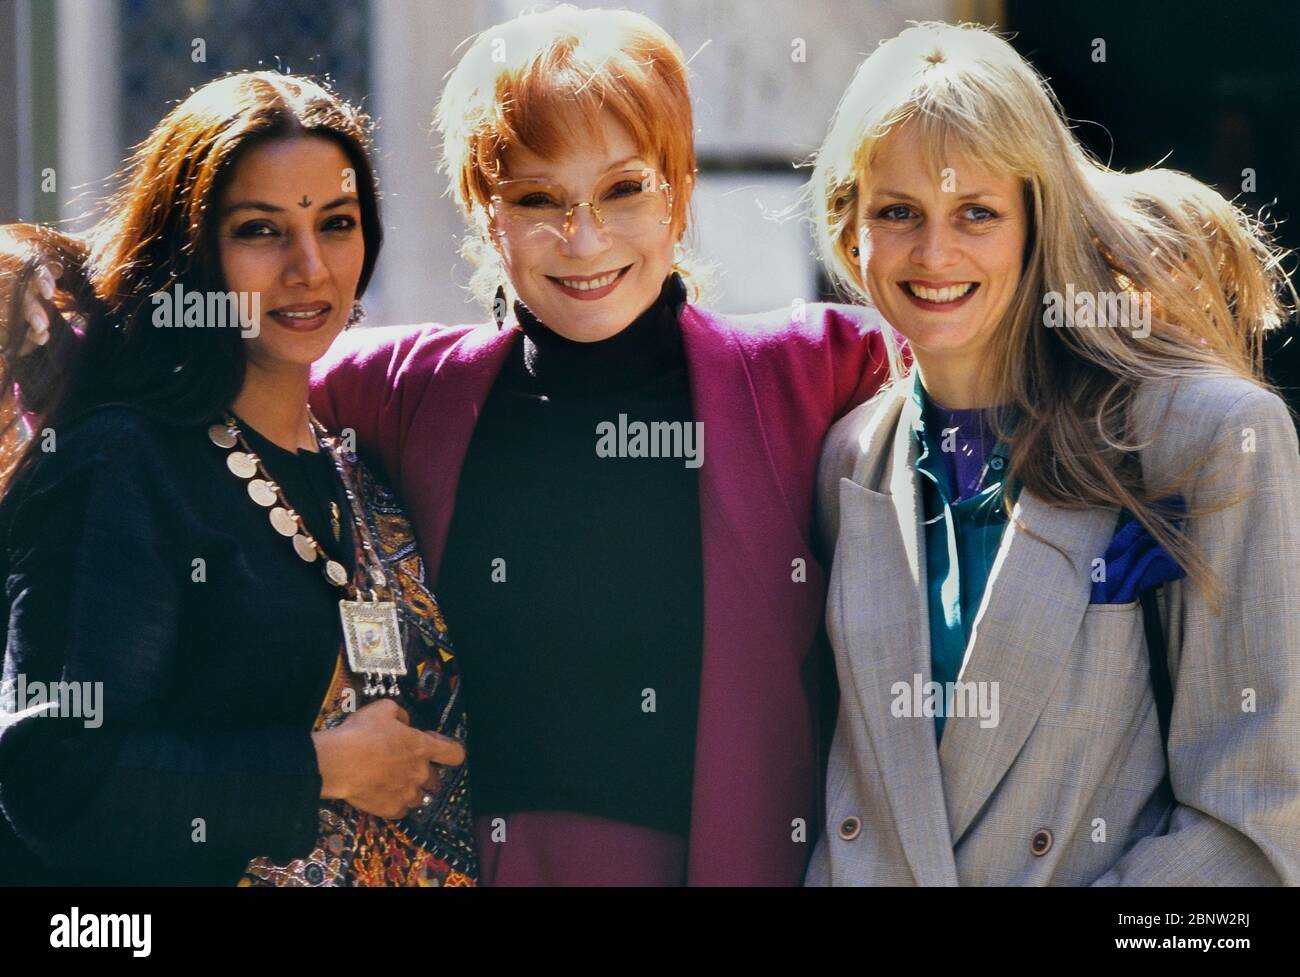 (L-R) Shabana Azmi, Shirley MacLaine and Twiggy attend a promotional shoot for the film 'Madame Sousatzka' , directed by John Schlesinger, in 1988 in London, England Stock Photo